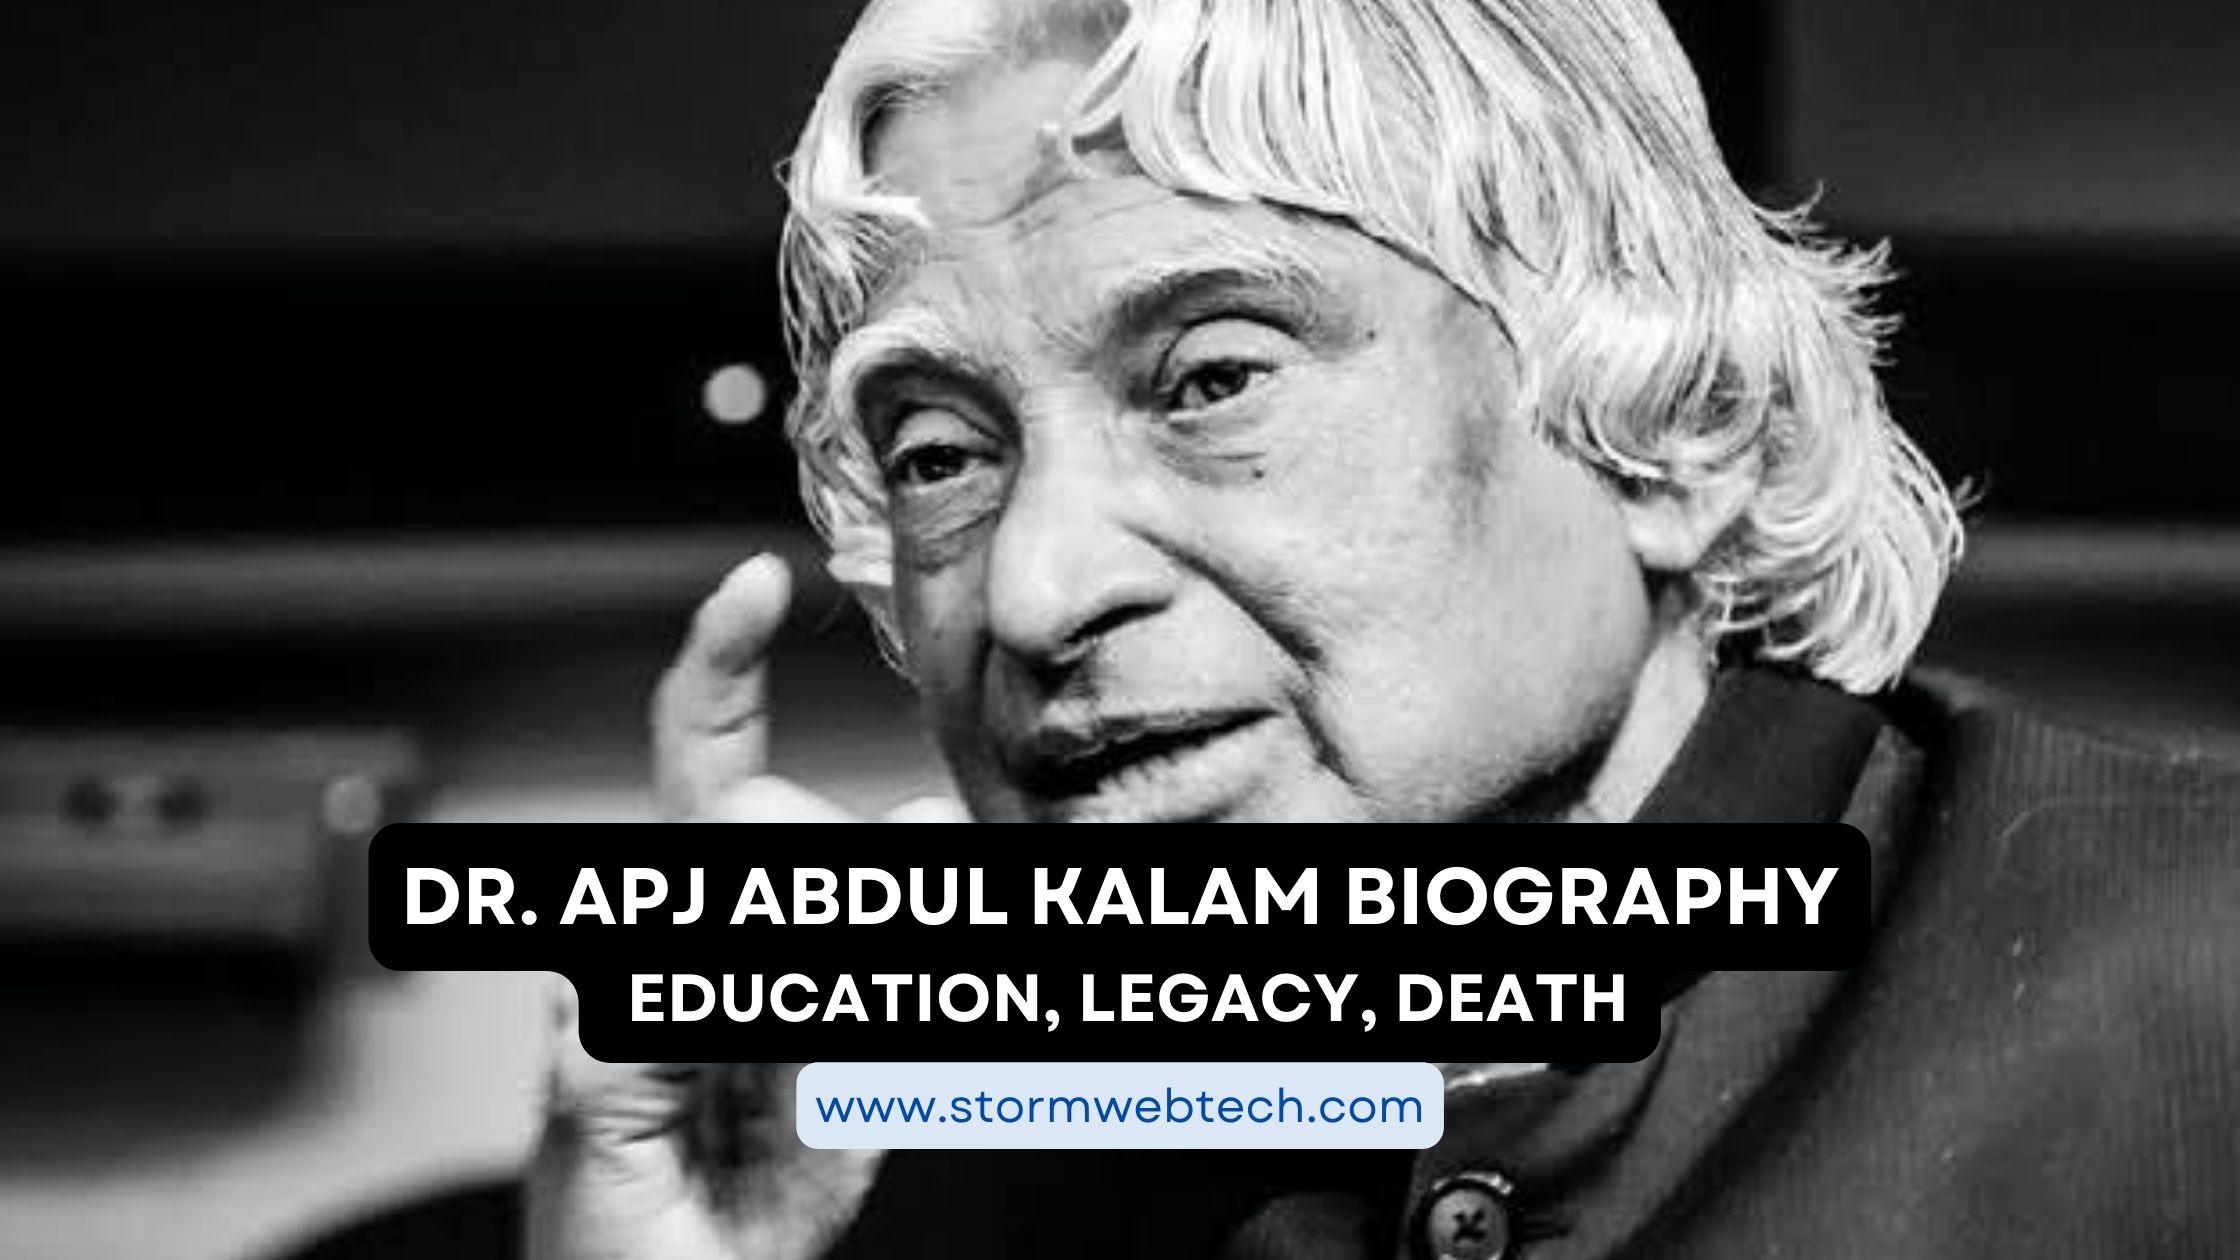 dr. apj abdul kalam biography extraordinary life and achievements a true embodiment of idea that anything is possible with dedication, perseverance